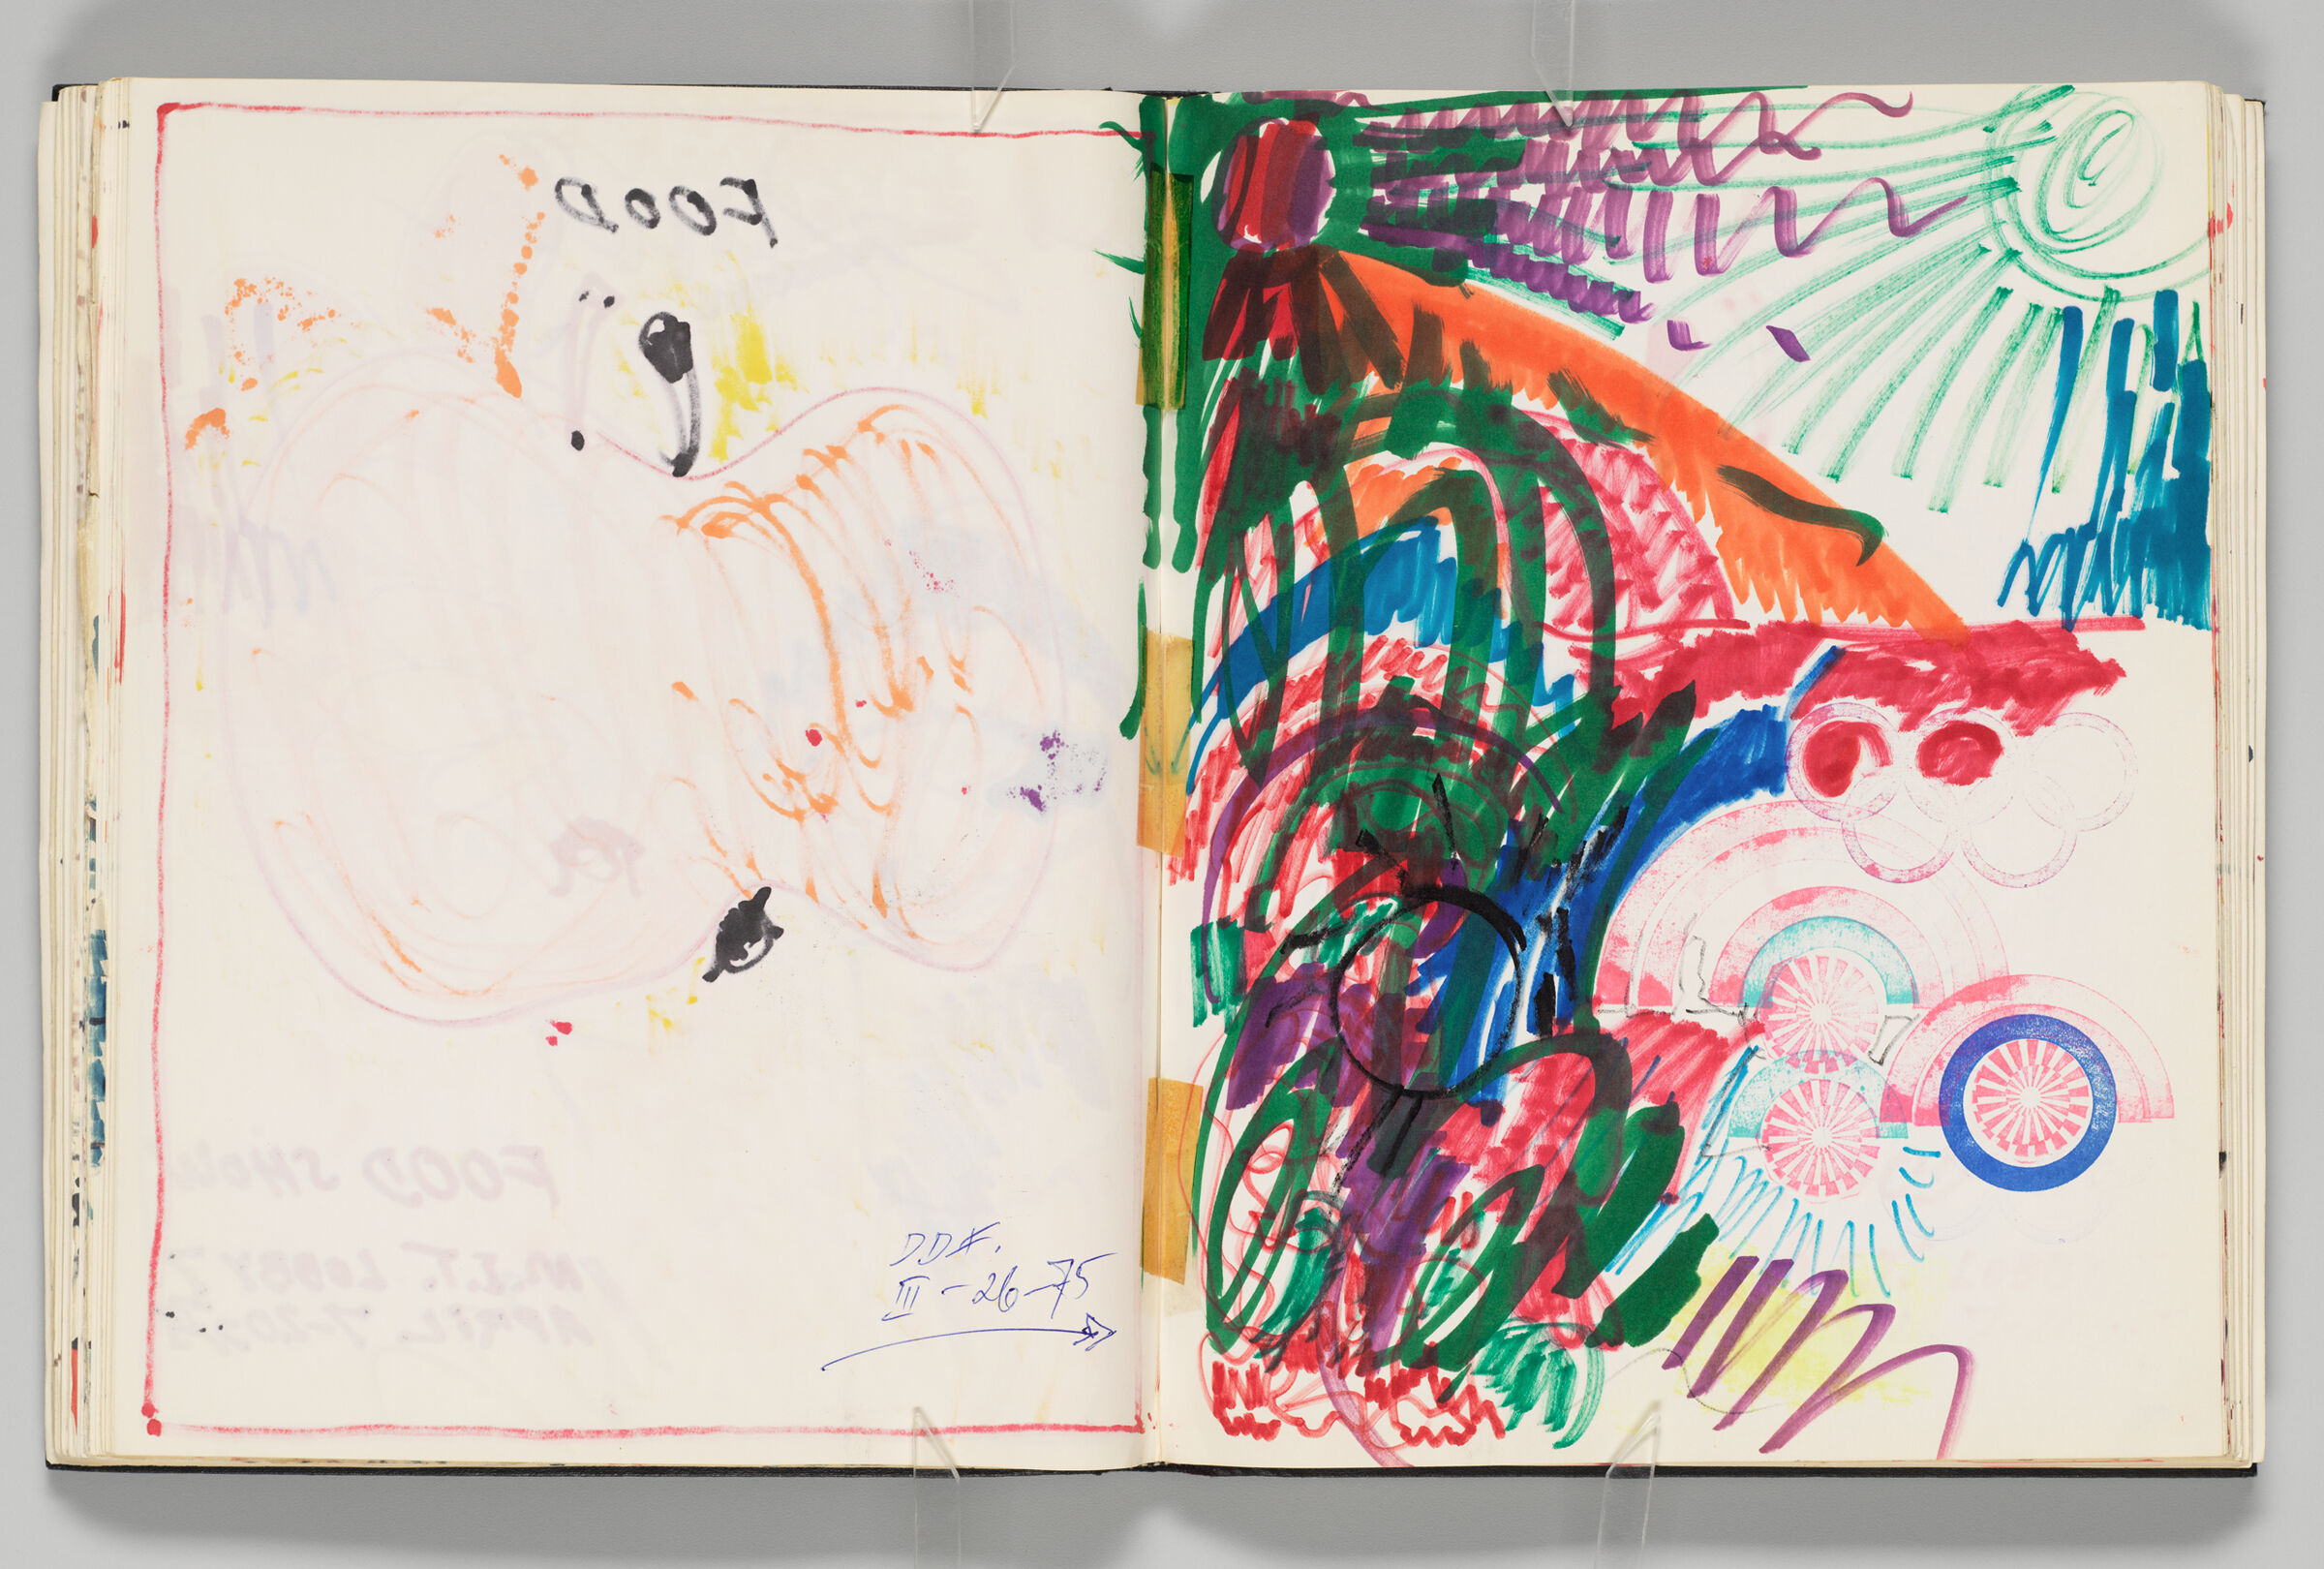 Untitled (Note And Bleed-Through Of Previous Page, Left Page); Untitled (Adhered Sketches Of Suns And Rainbows, Right Page)